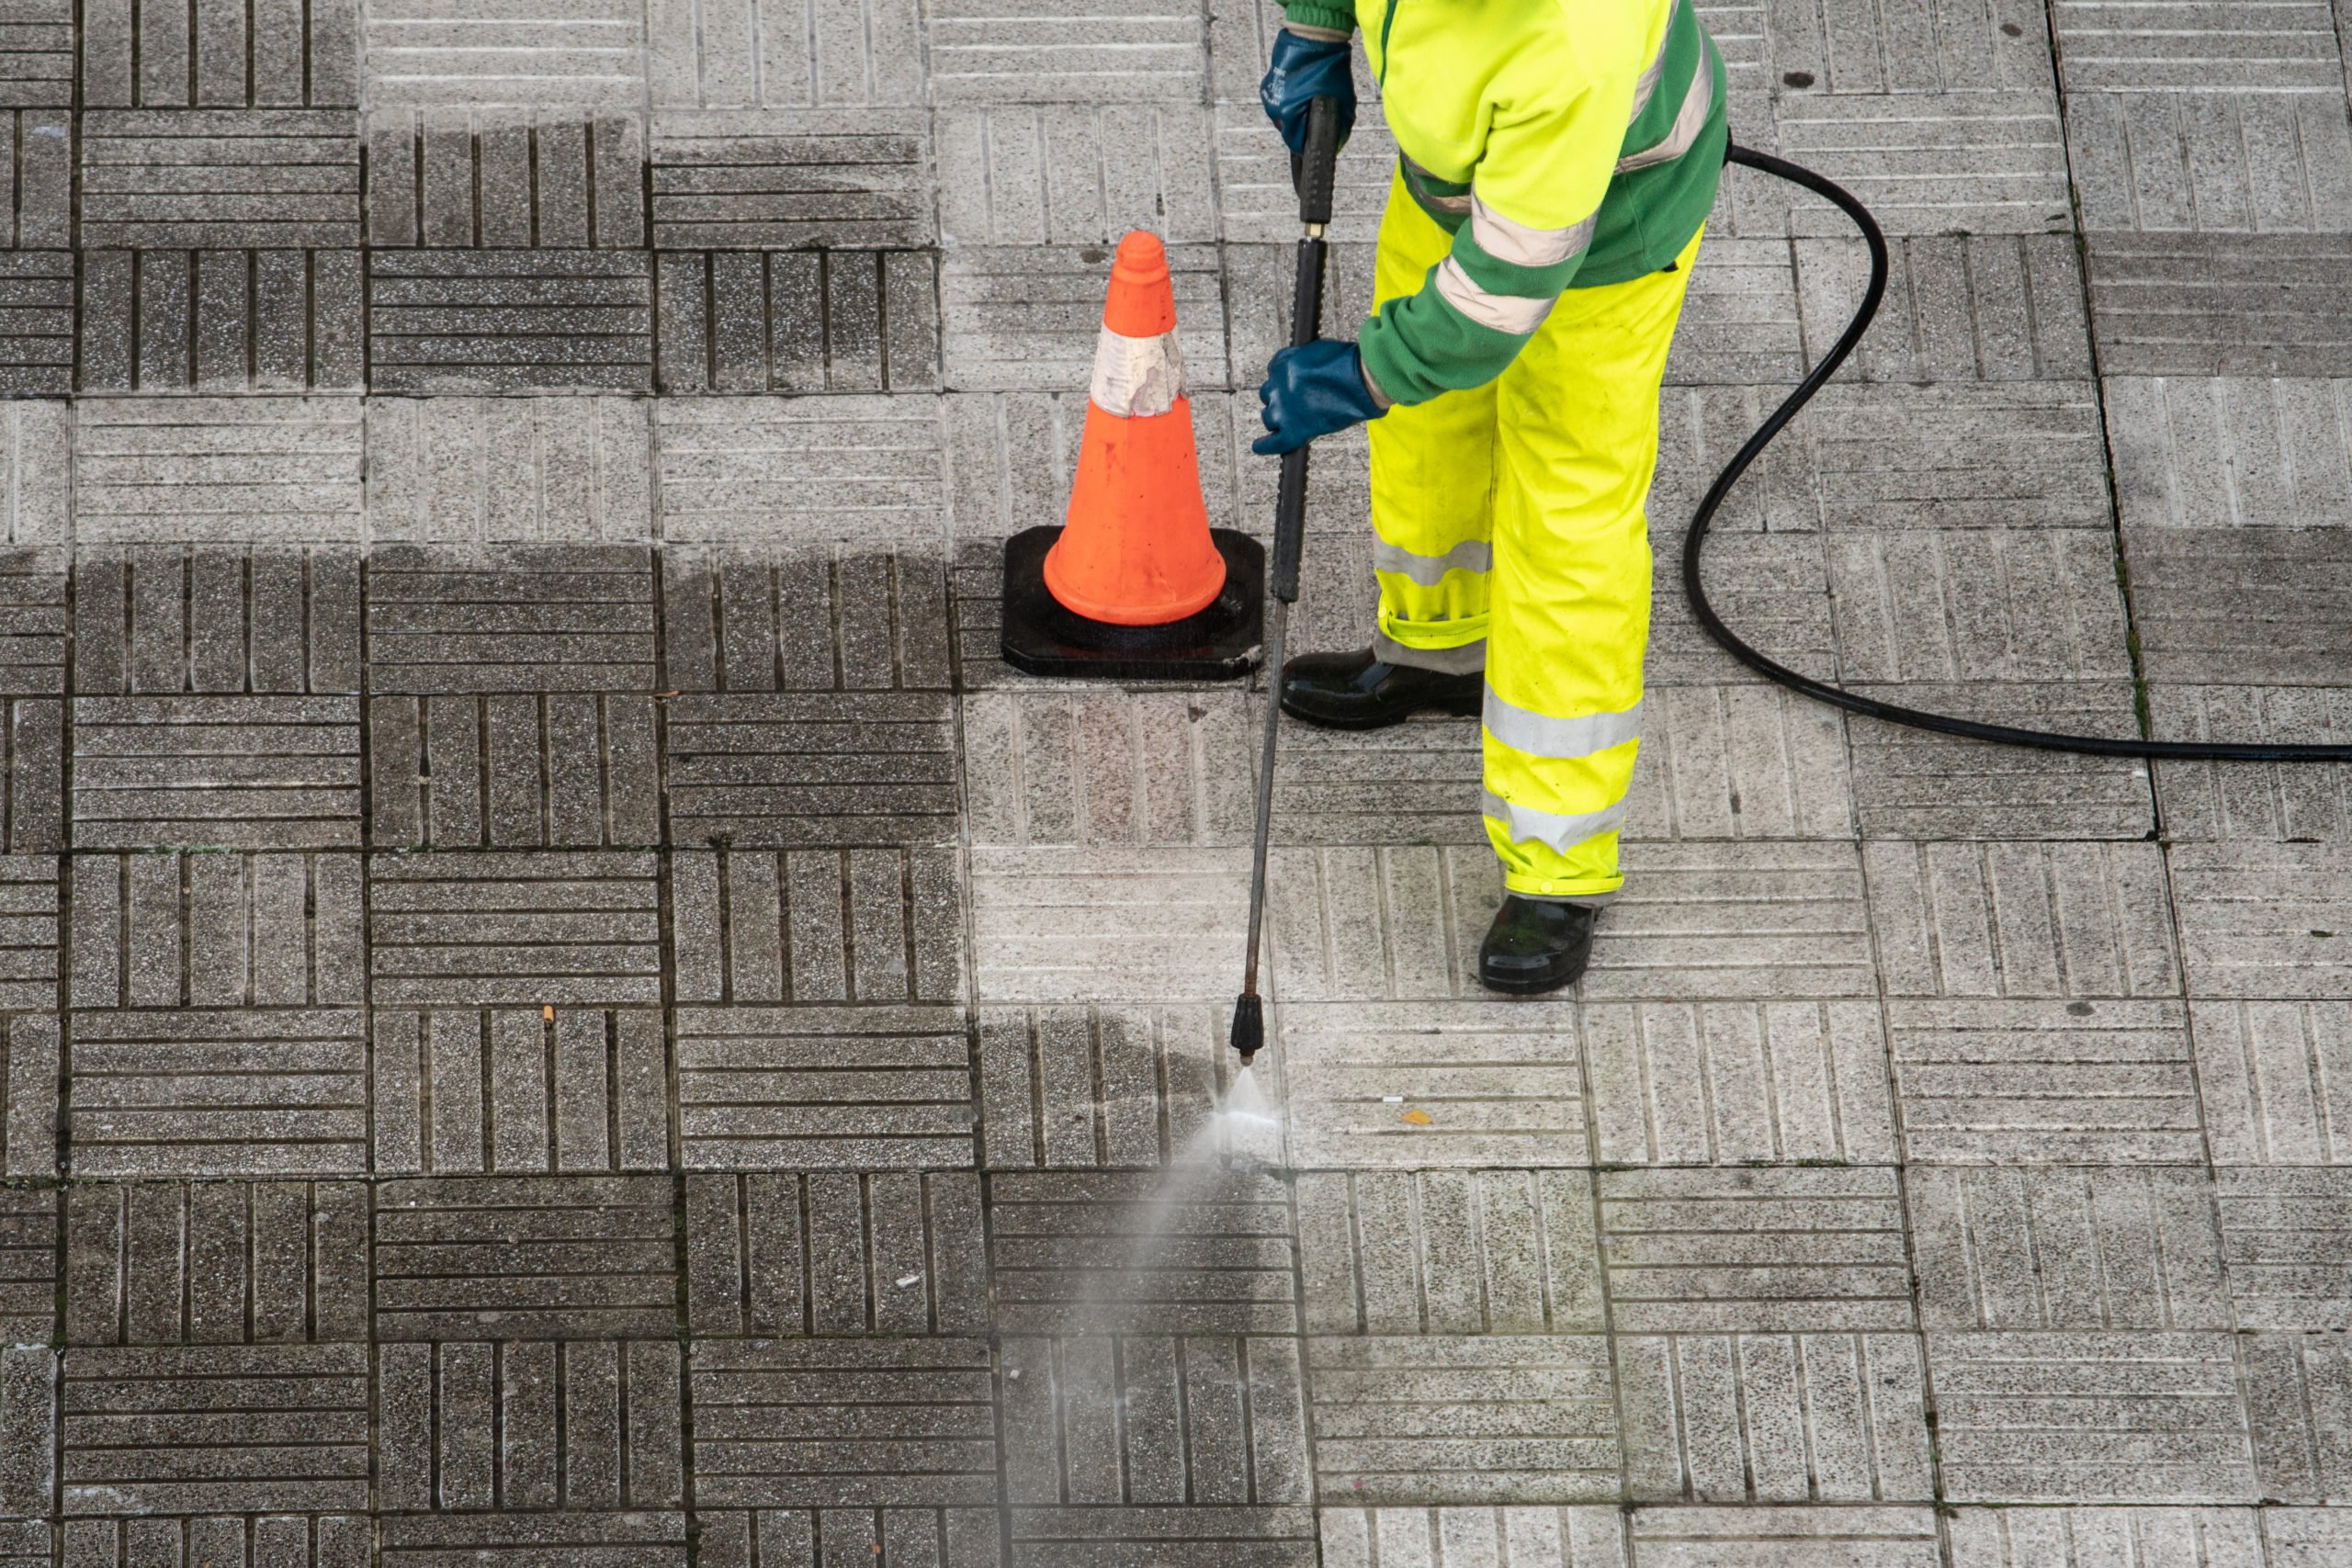 Community Cleaning - Worker cleaning the street sidewalk with high pressure water jet